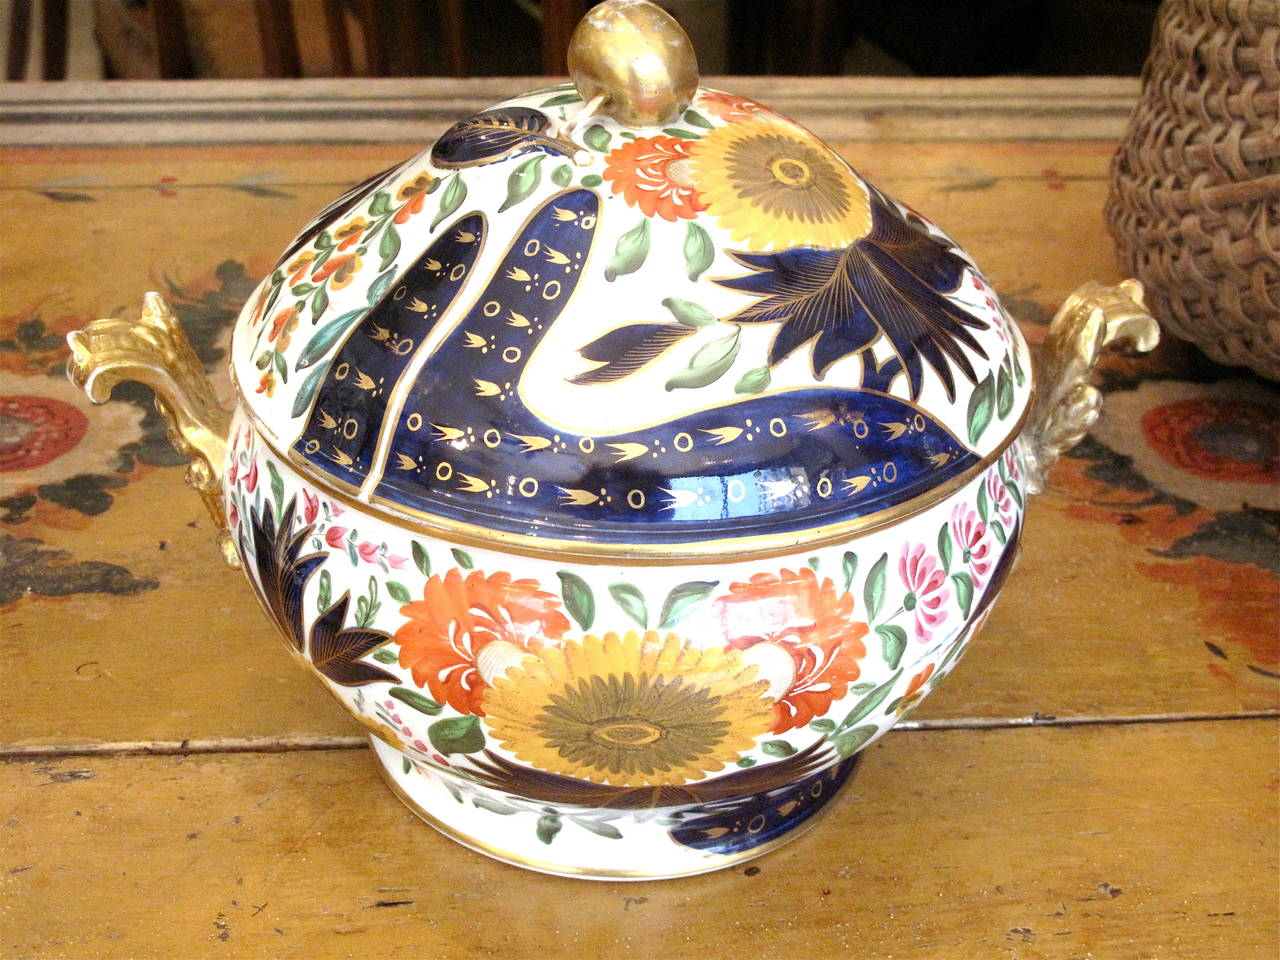 A very fine and rare tureen in the sought after “Thumb and Finger” early English Imari pattern, in very good condition, with marvelous gilded Rococo handles and a gilt apple knob. Fresh pink, orange and yellow flowers enliven the cobalt foliage.